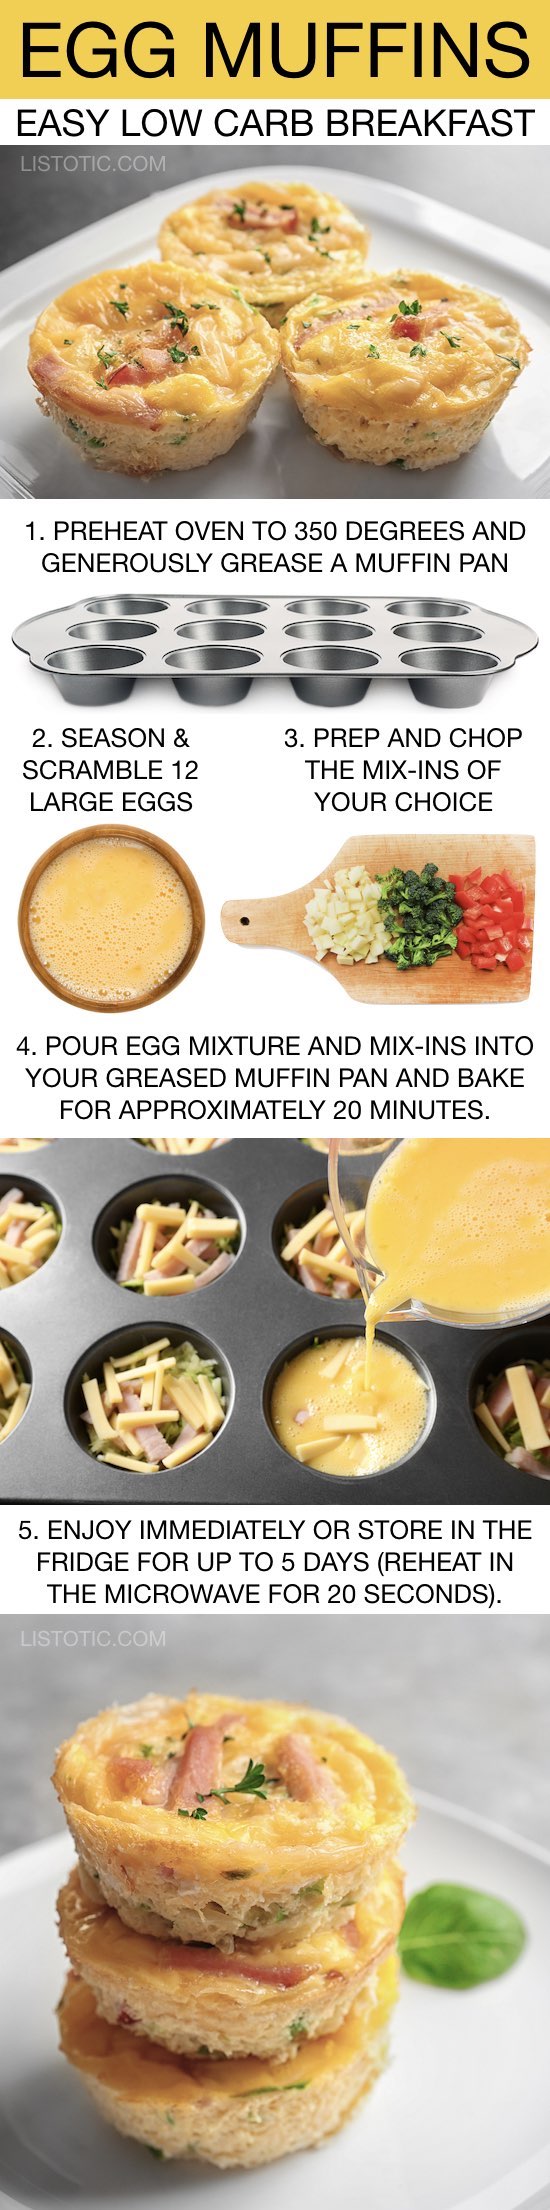 Easy Keto Egg Muffins Recipe | These easy low carb and keto breakfast recipe ideas are perfect to make ahead of time, and simply grab for on the go! Meal prep can be a life saver! Eating healthy has never been so easy with these time-saving tips and tricks. Everything from casseroles to muffins! They're perfect for a ketogenic diet. Listotic.com